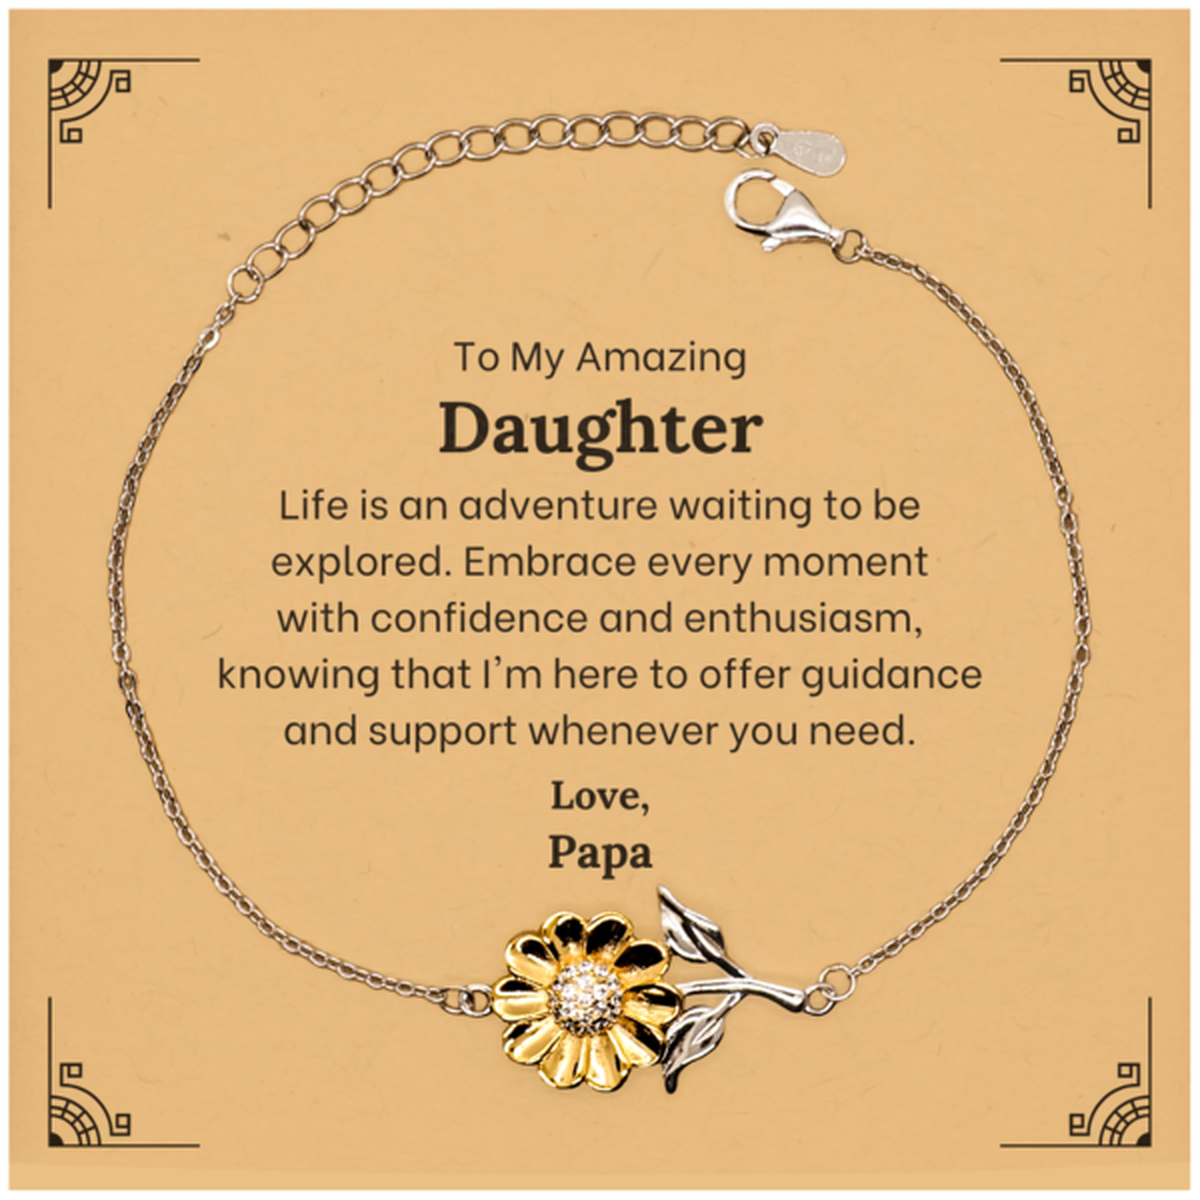 To My Amazing Daughter Supporting Sunflower Bracelet, Life is an adventure waiting to be explored, Birthday Unique Gifts for Daughter from Papa.